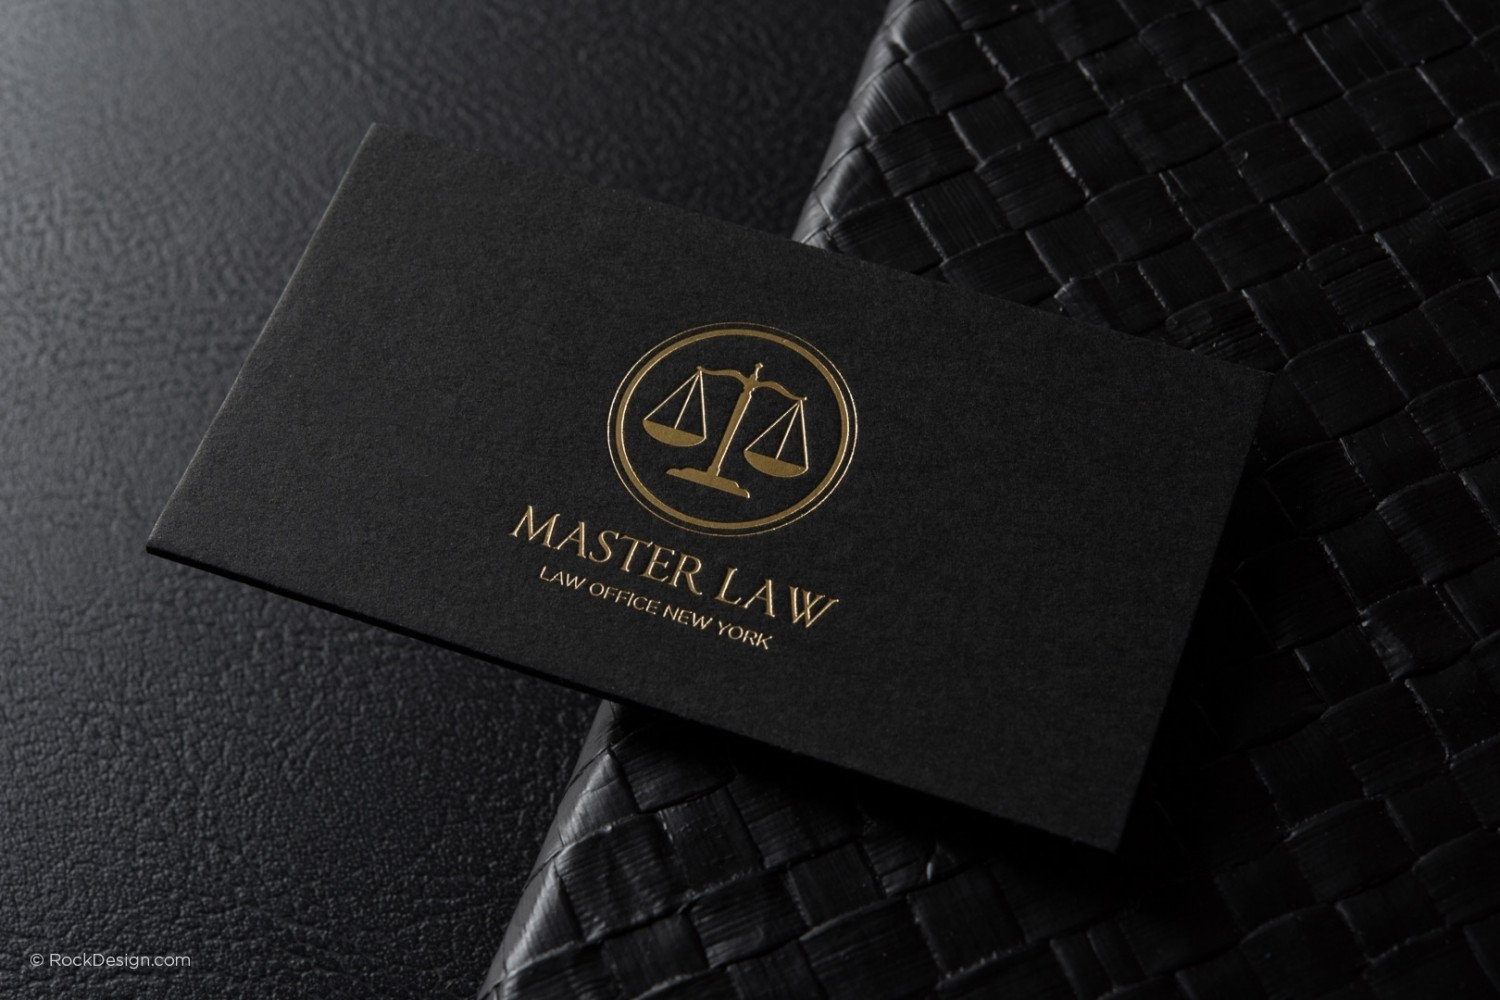 Free Lawyer Business Card Template | Rockdesign within Legal Business Cards Templates Free